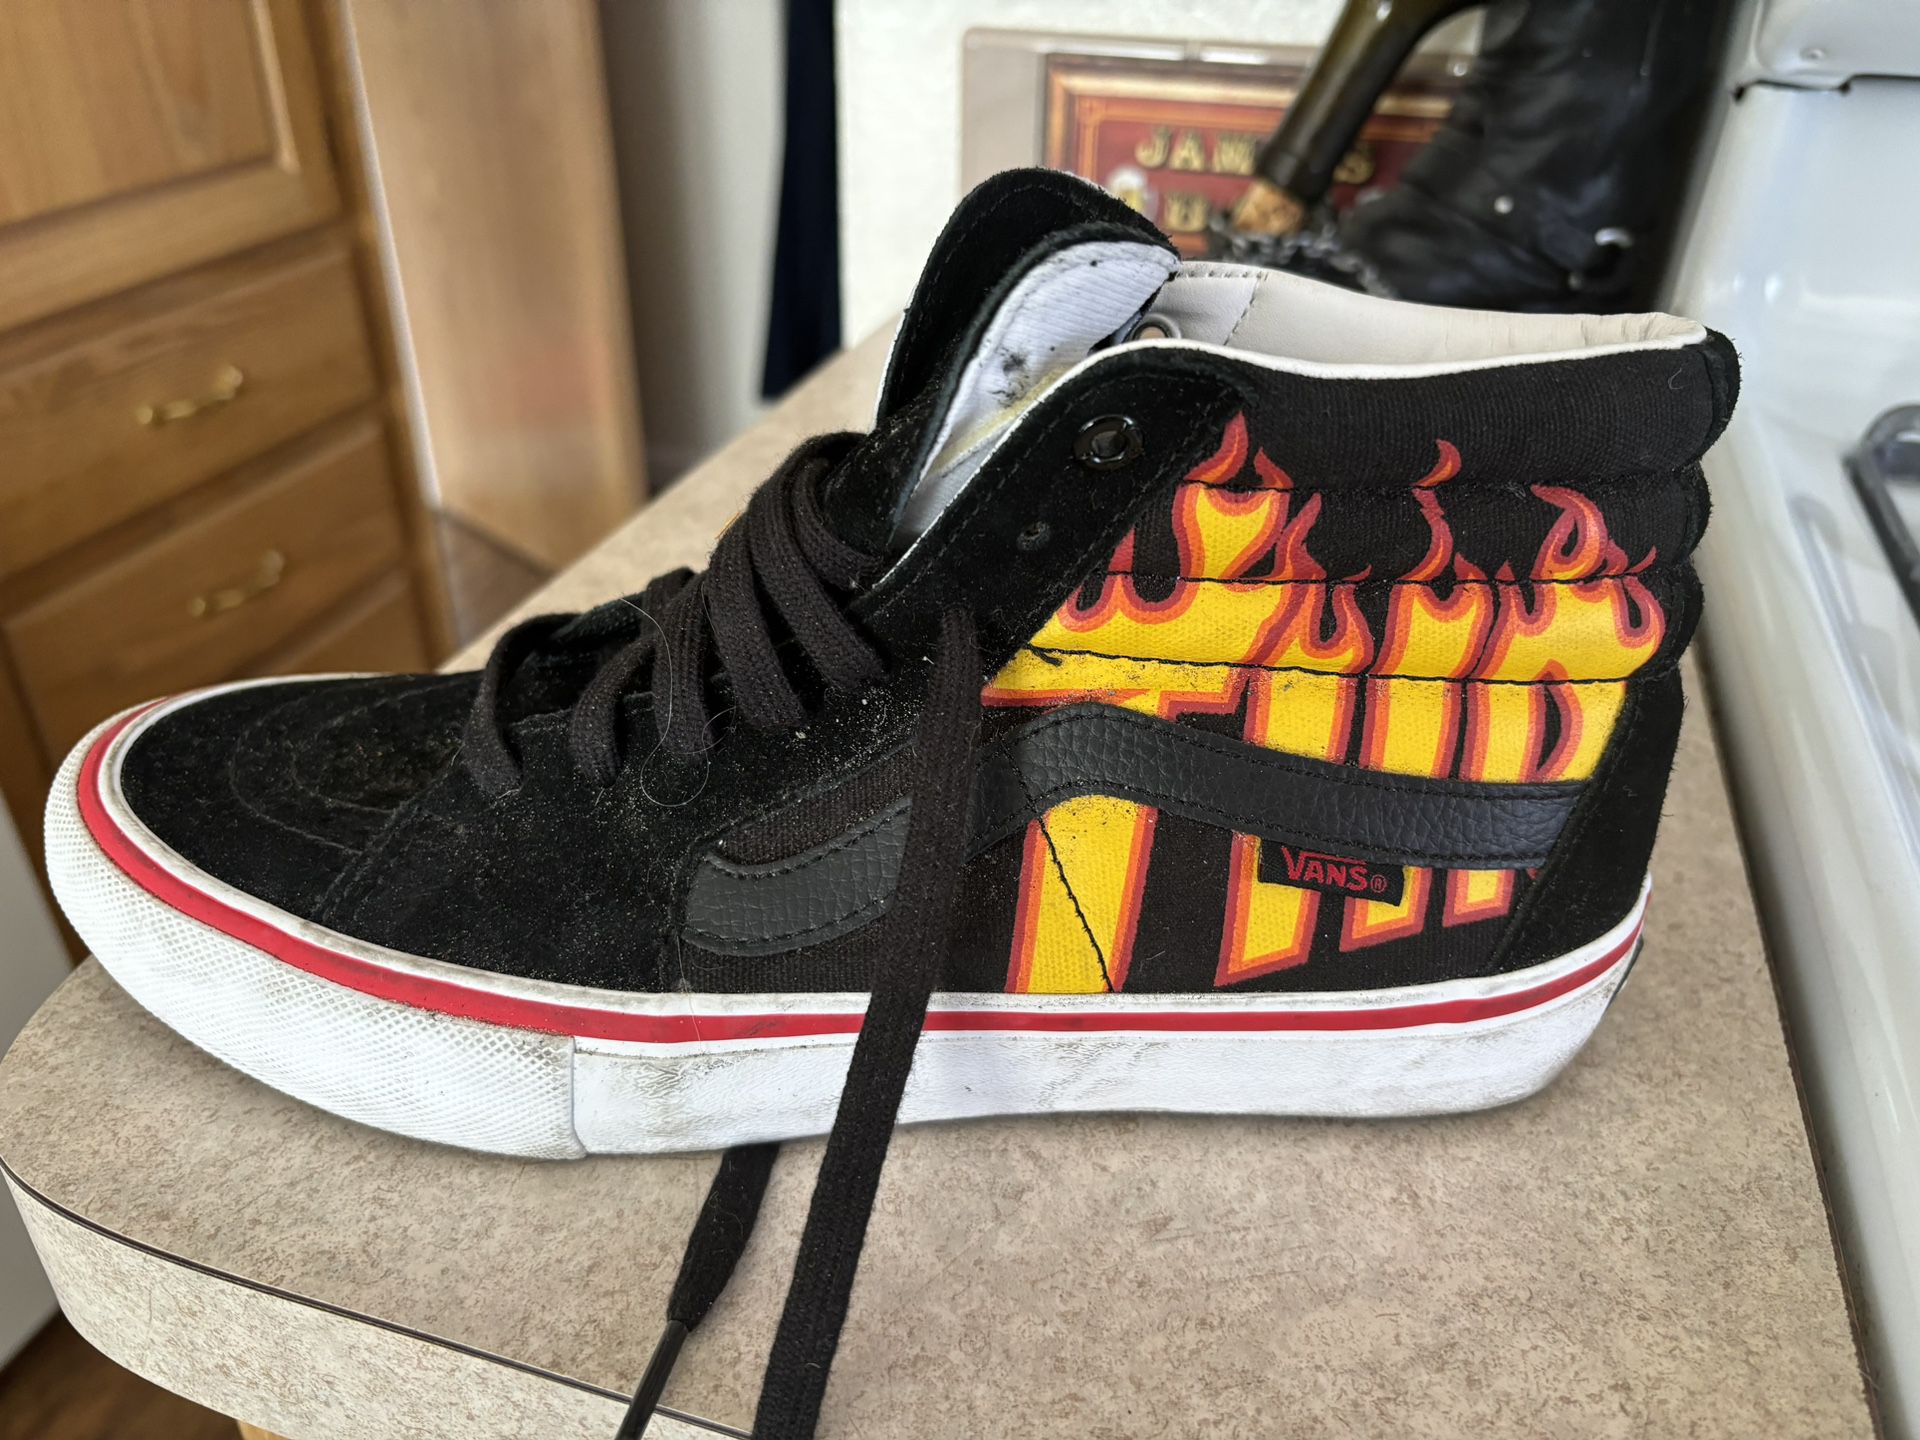 High top men’s vans Shoeswith flames on the side